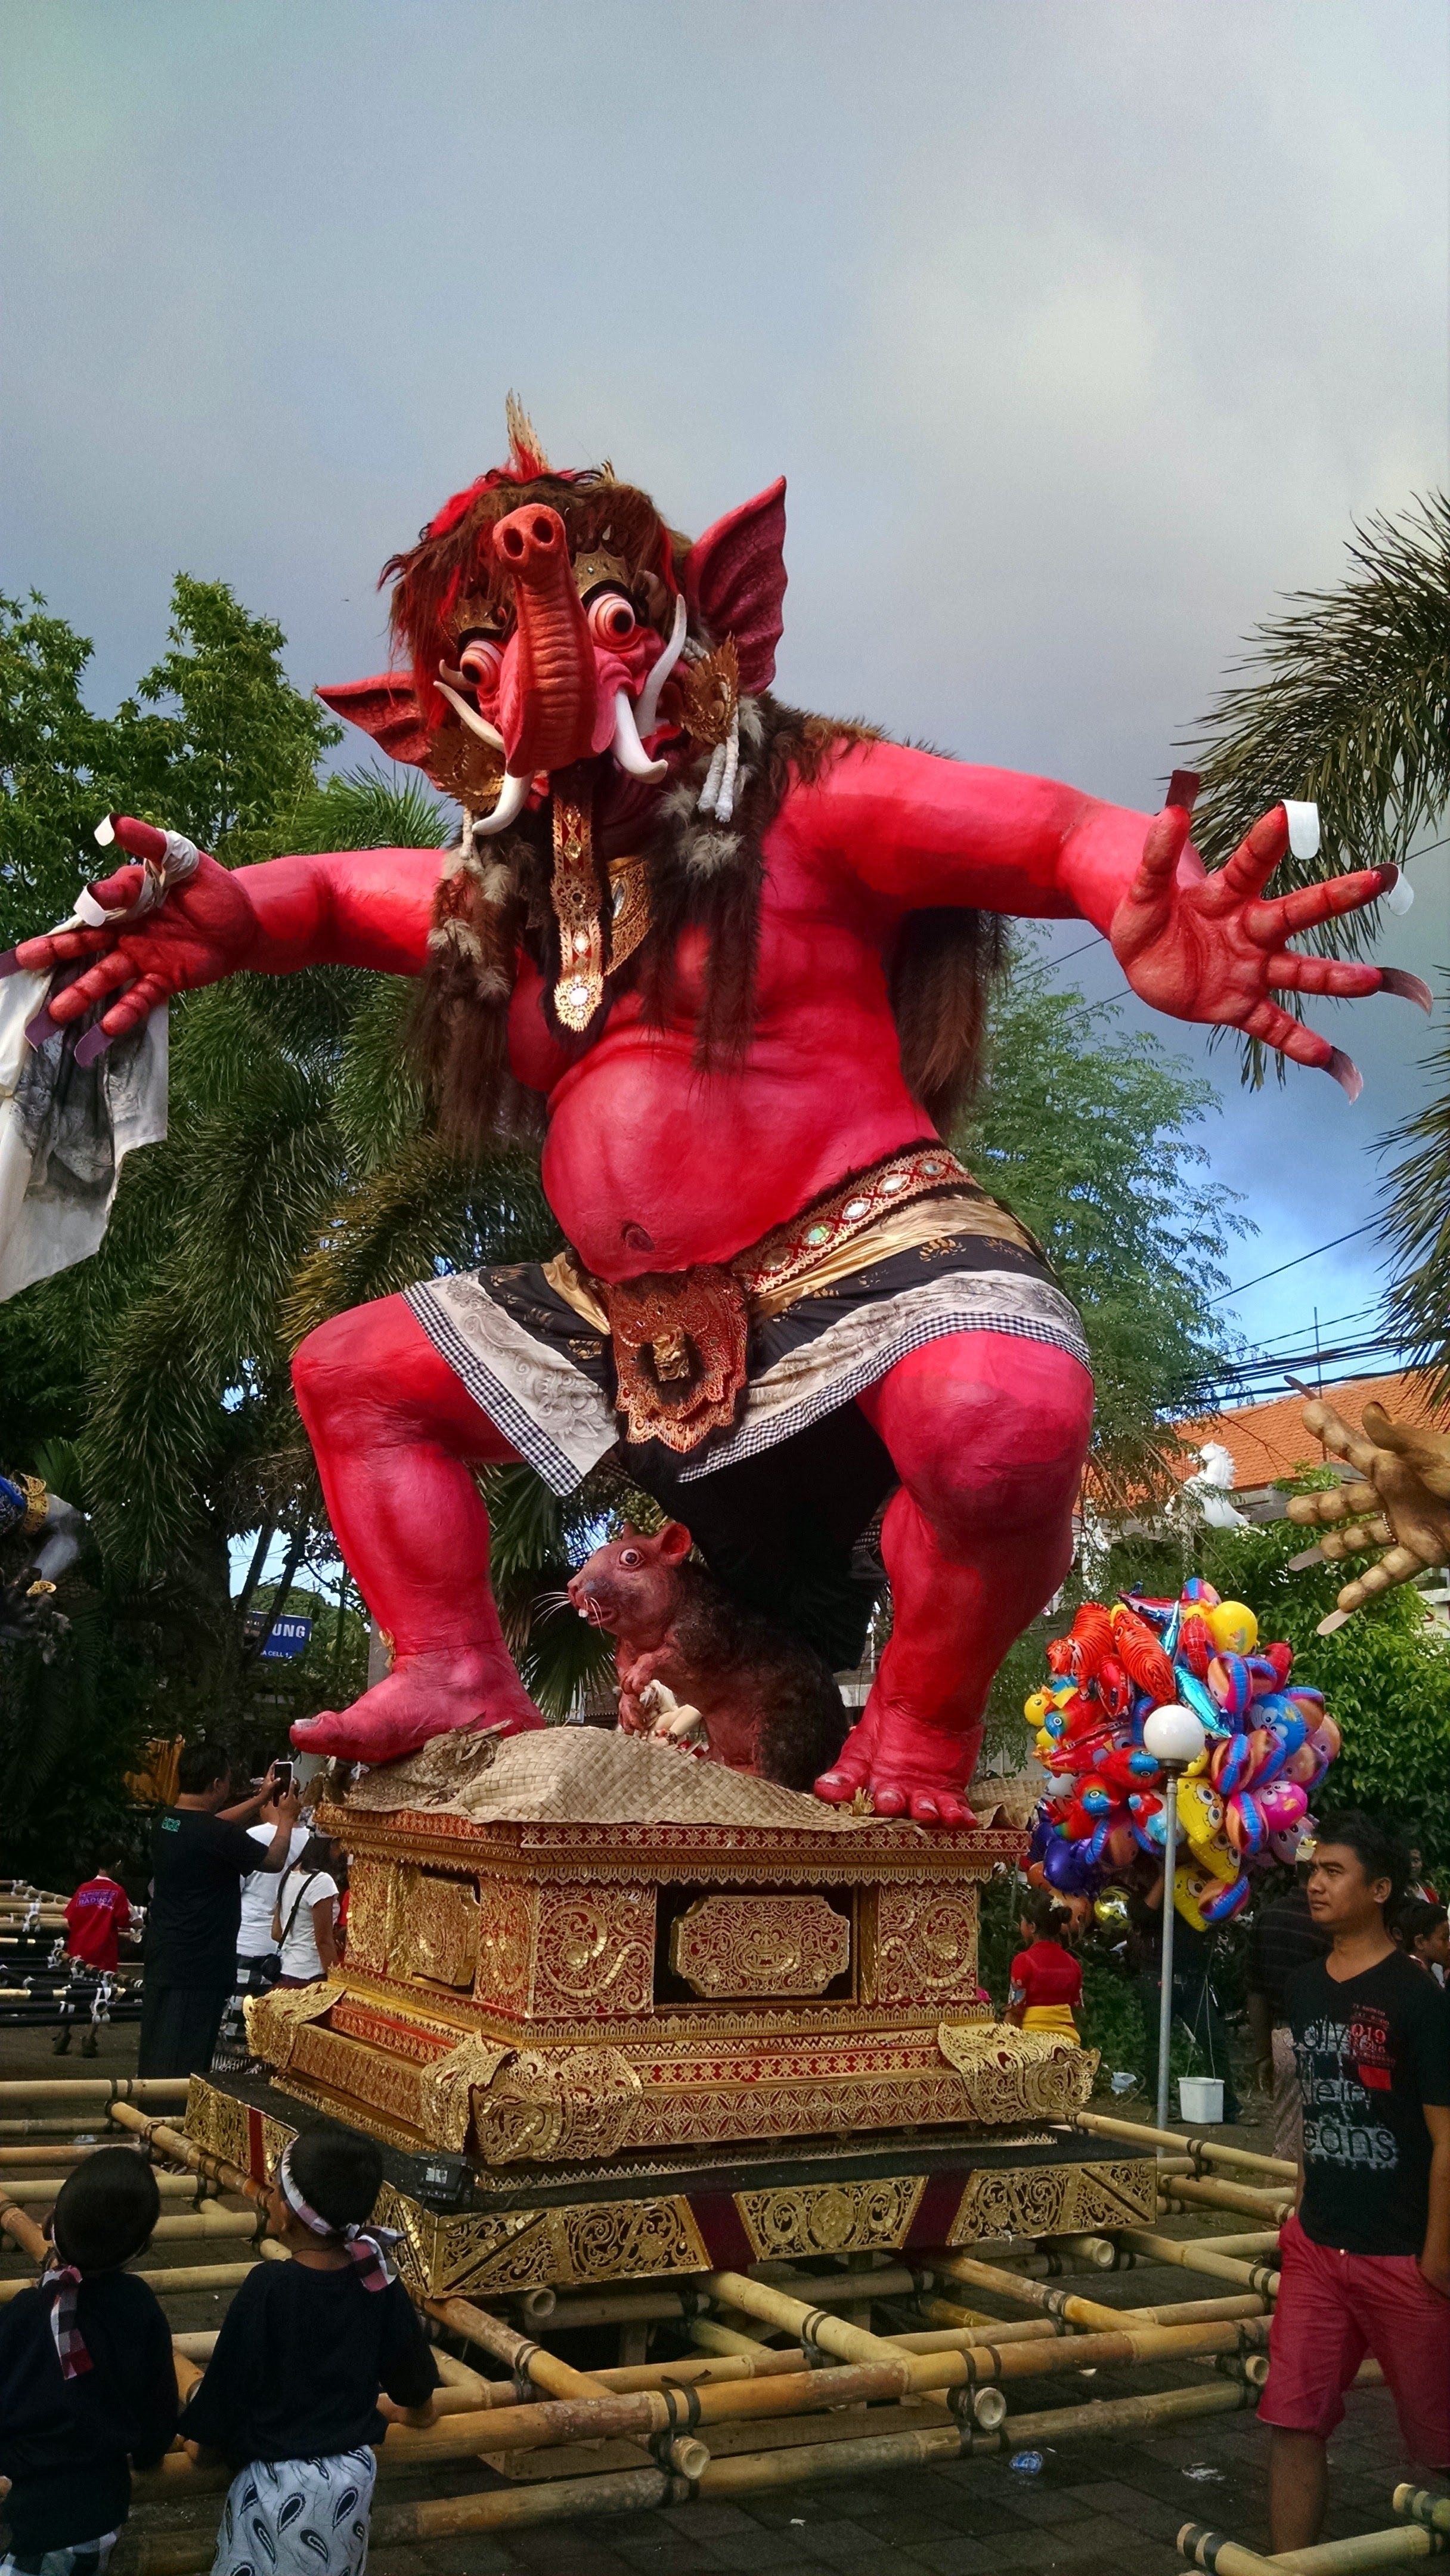 PacRim students in March 2015 stumbled onto an Ngrupuk parade in Ubud, Bali, Indonesia. The parades feature huge ogoh-ogoh statues, ”made with papier-mâché and lots of paint,“ says faculty member Gareth Barkin, who was on the trip.